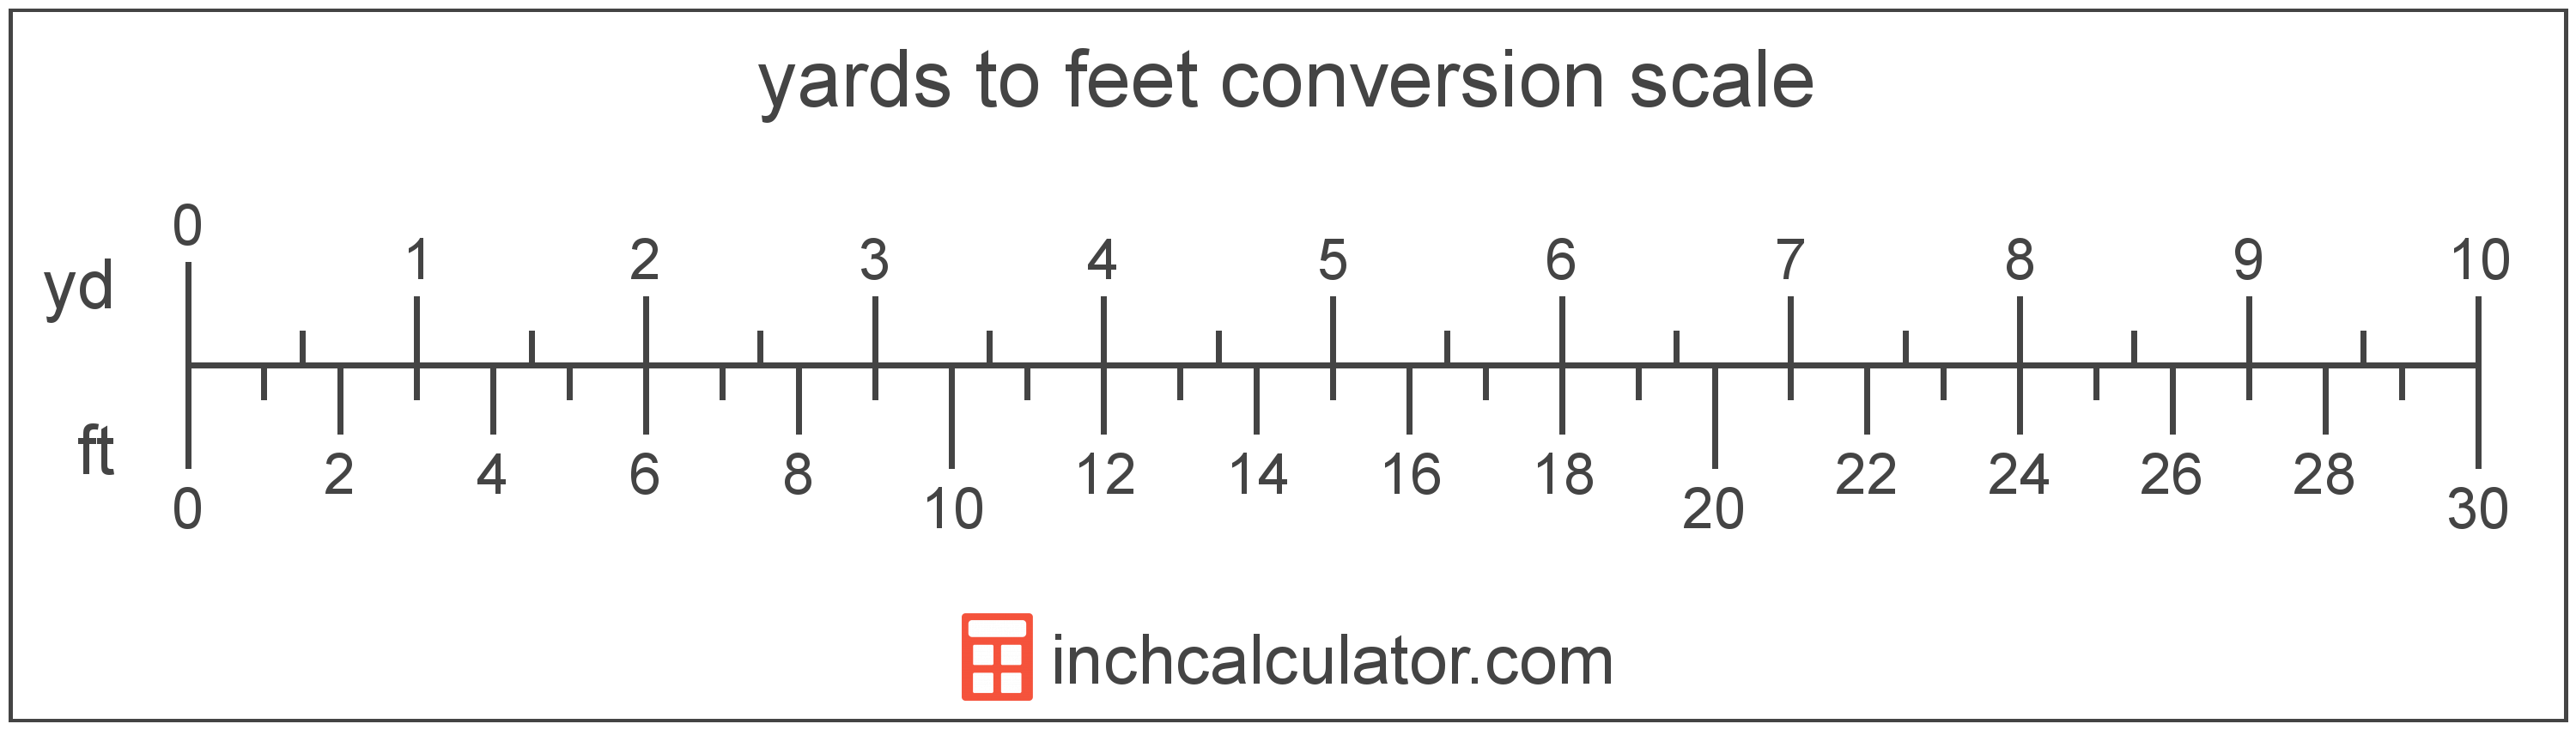 conversion scale showing yards and equivalent feet length values